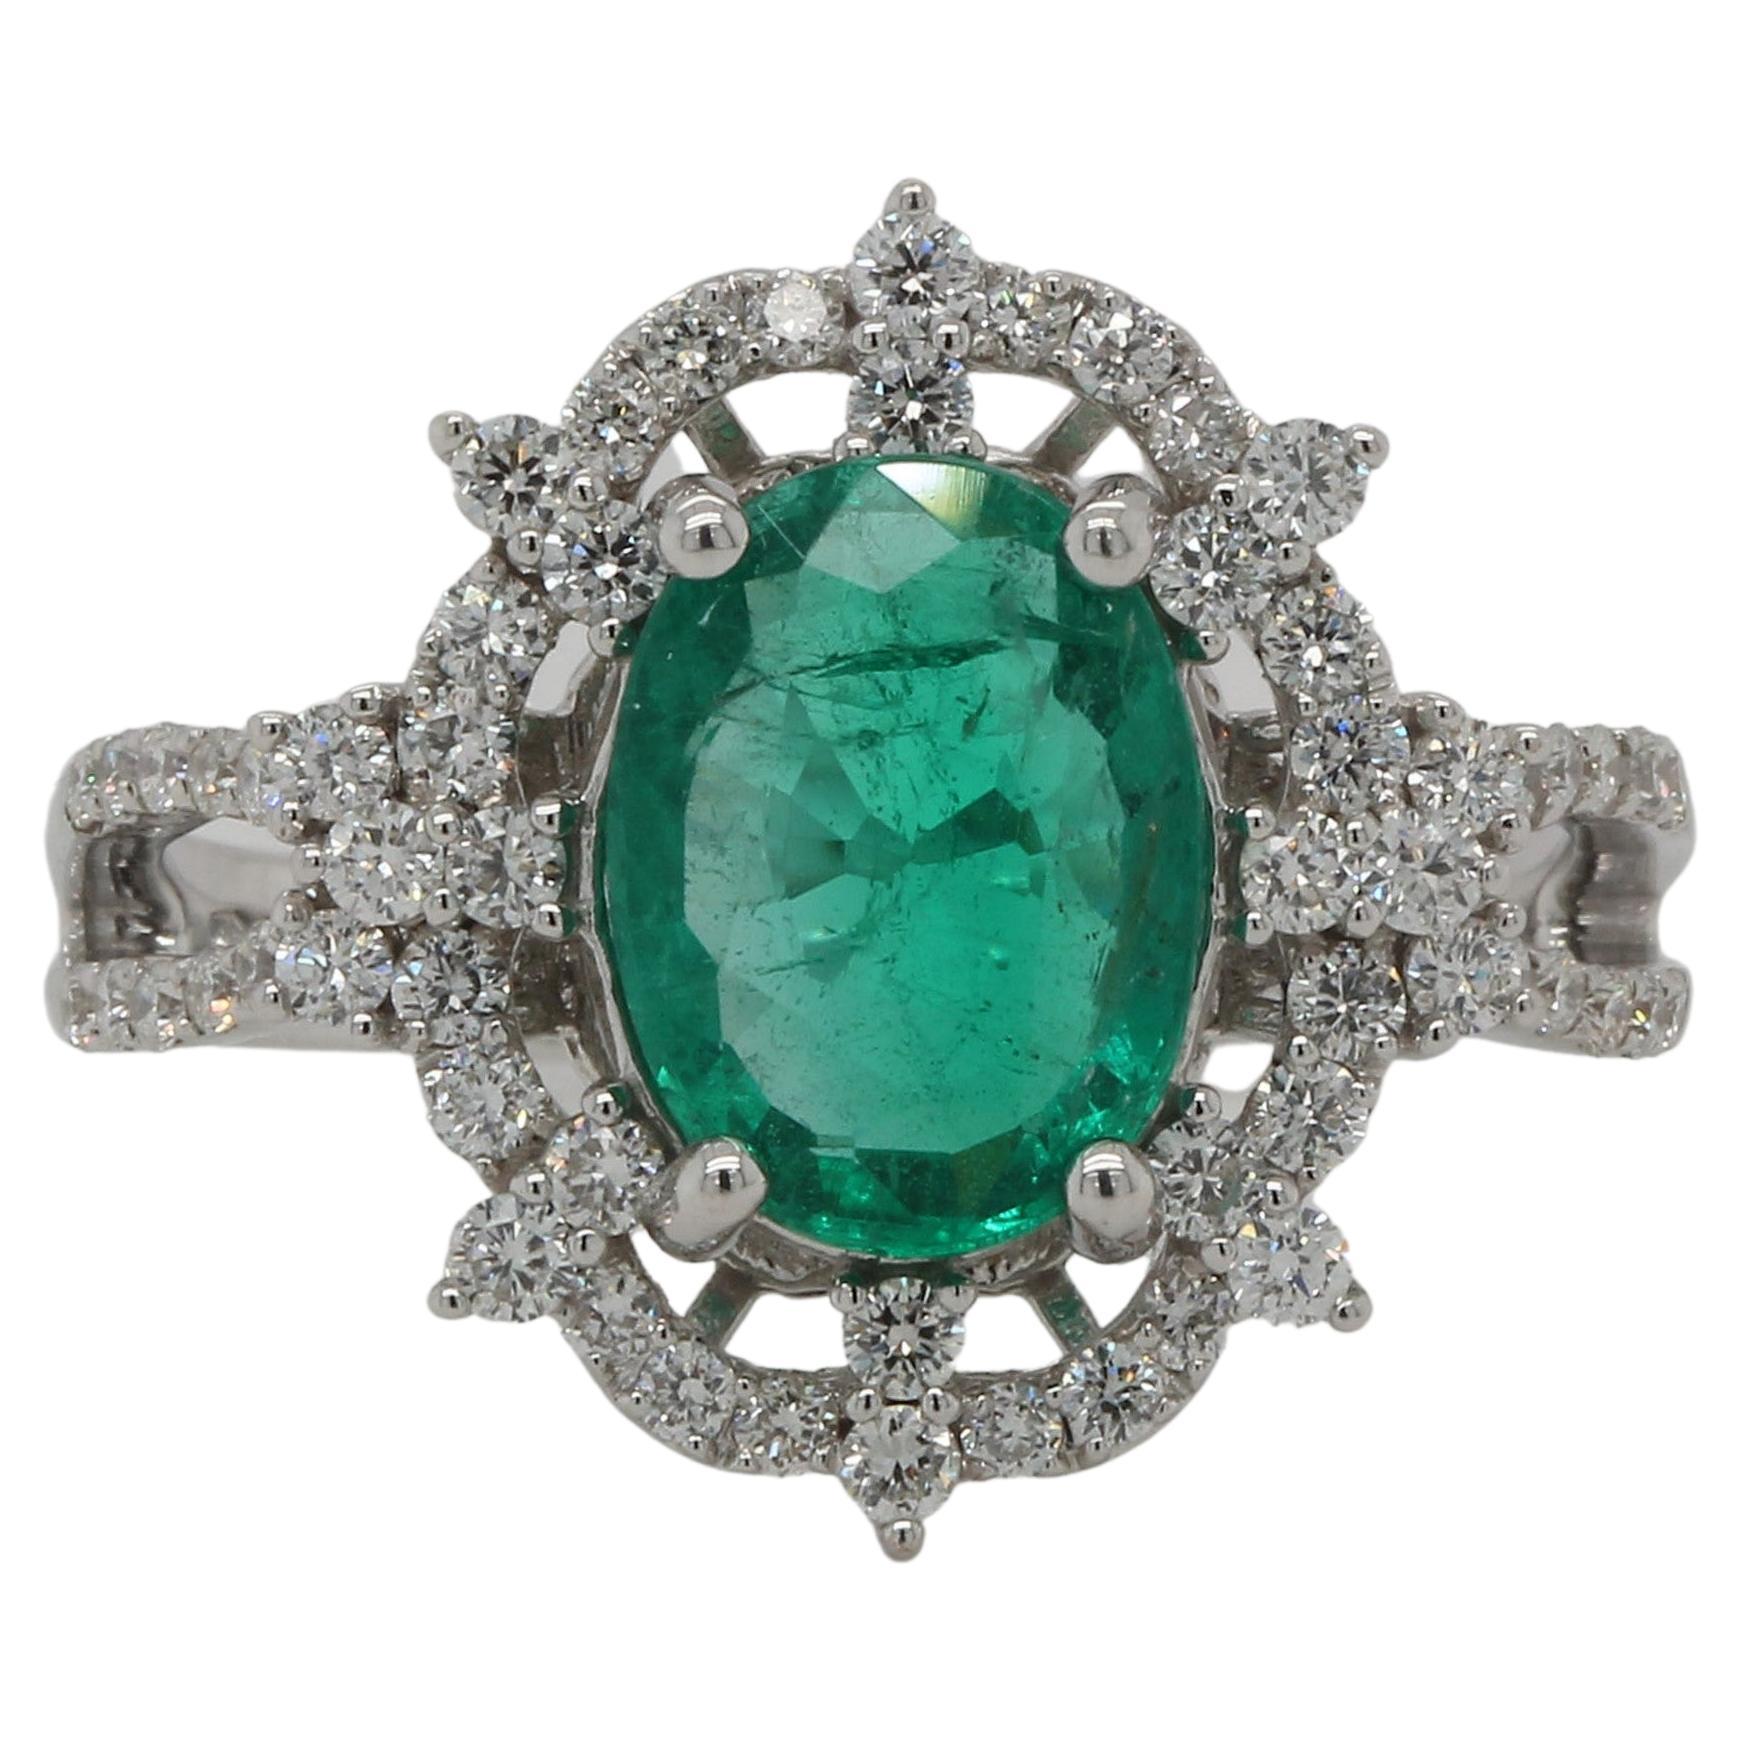 This gorgeous emerald and diamond ring is set in 18K white gold. Perfect for a birthday, anniversary or any other special occasion, it features an oval emerald that weighs 1.91 carats and is surrounded by around 0.61 carat of round diamonds. This